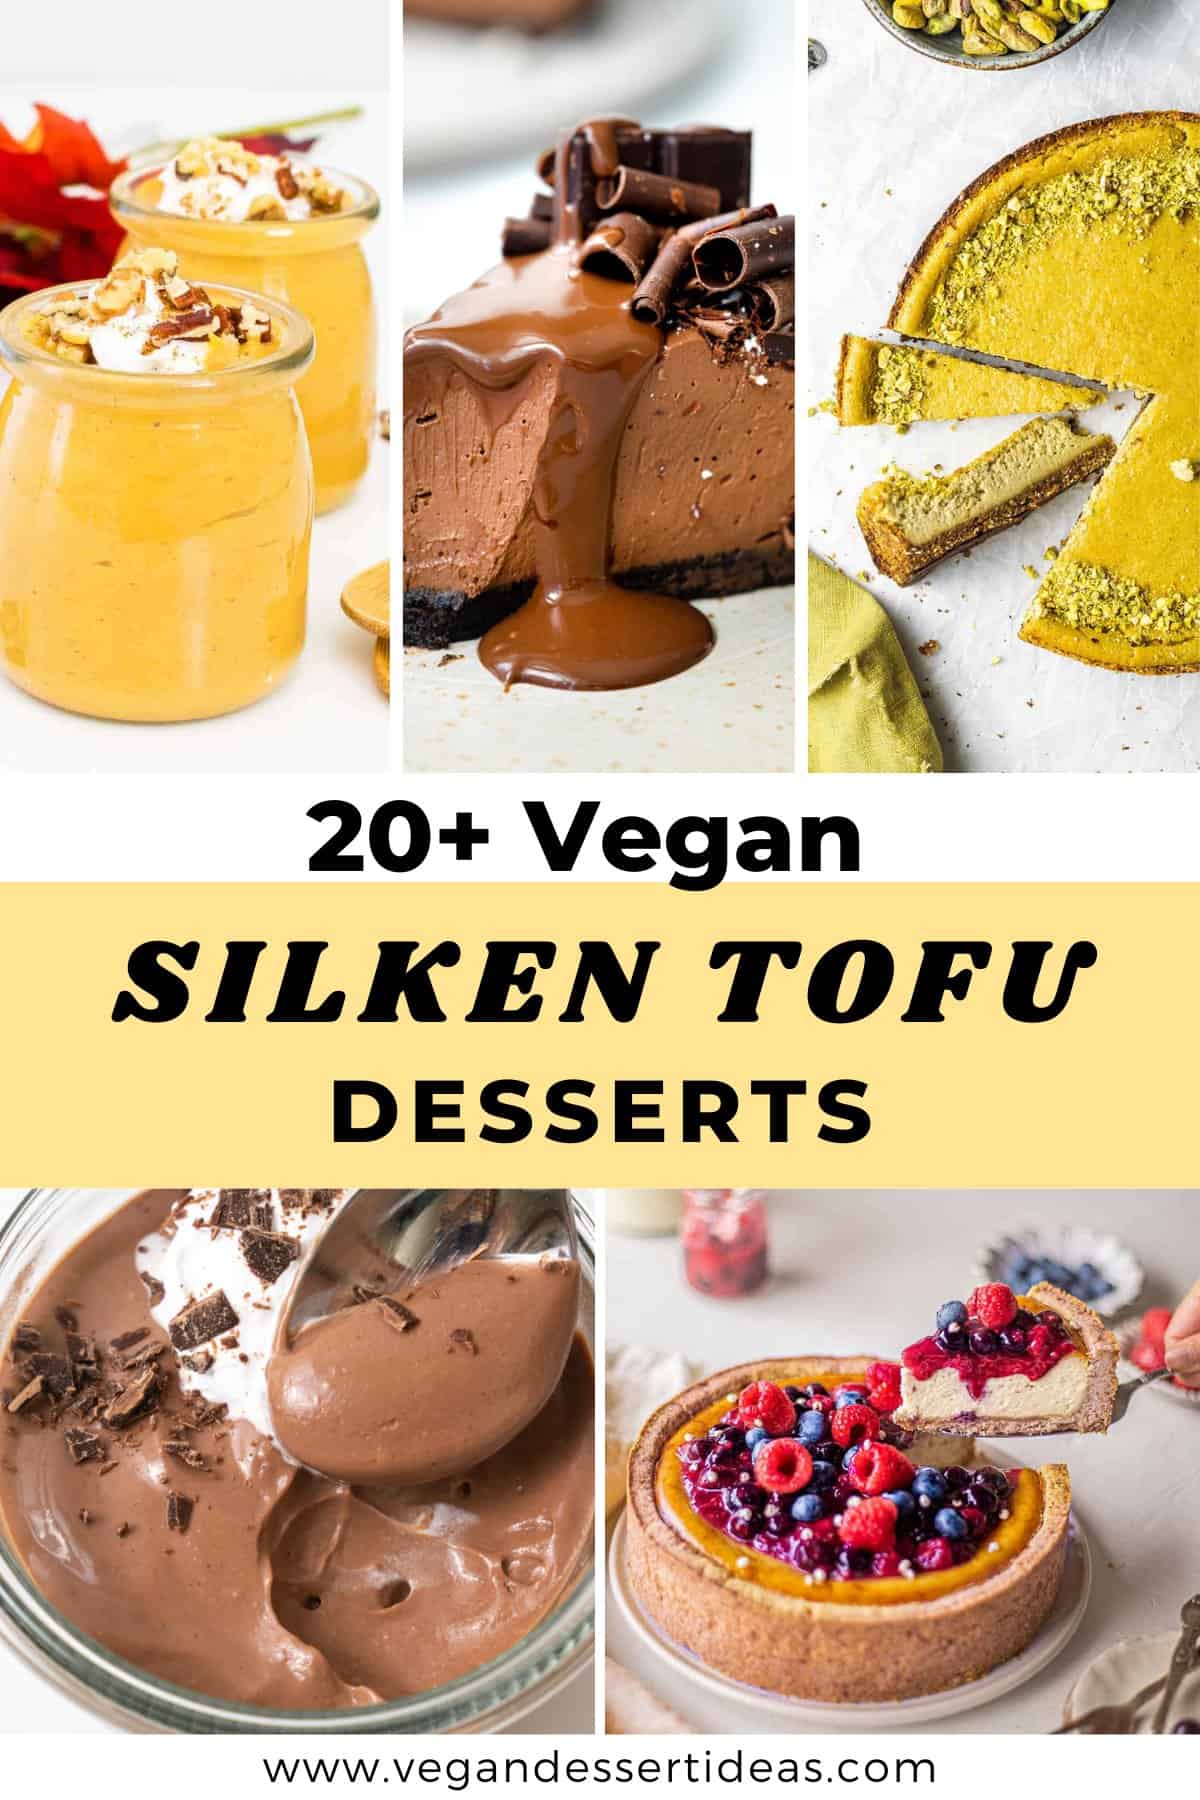 A variety of puddings and cheesecakes "20+ Vegan Silken Tofu Desserts".